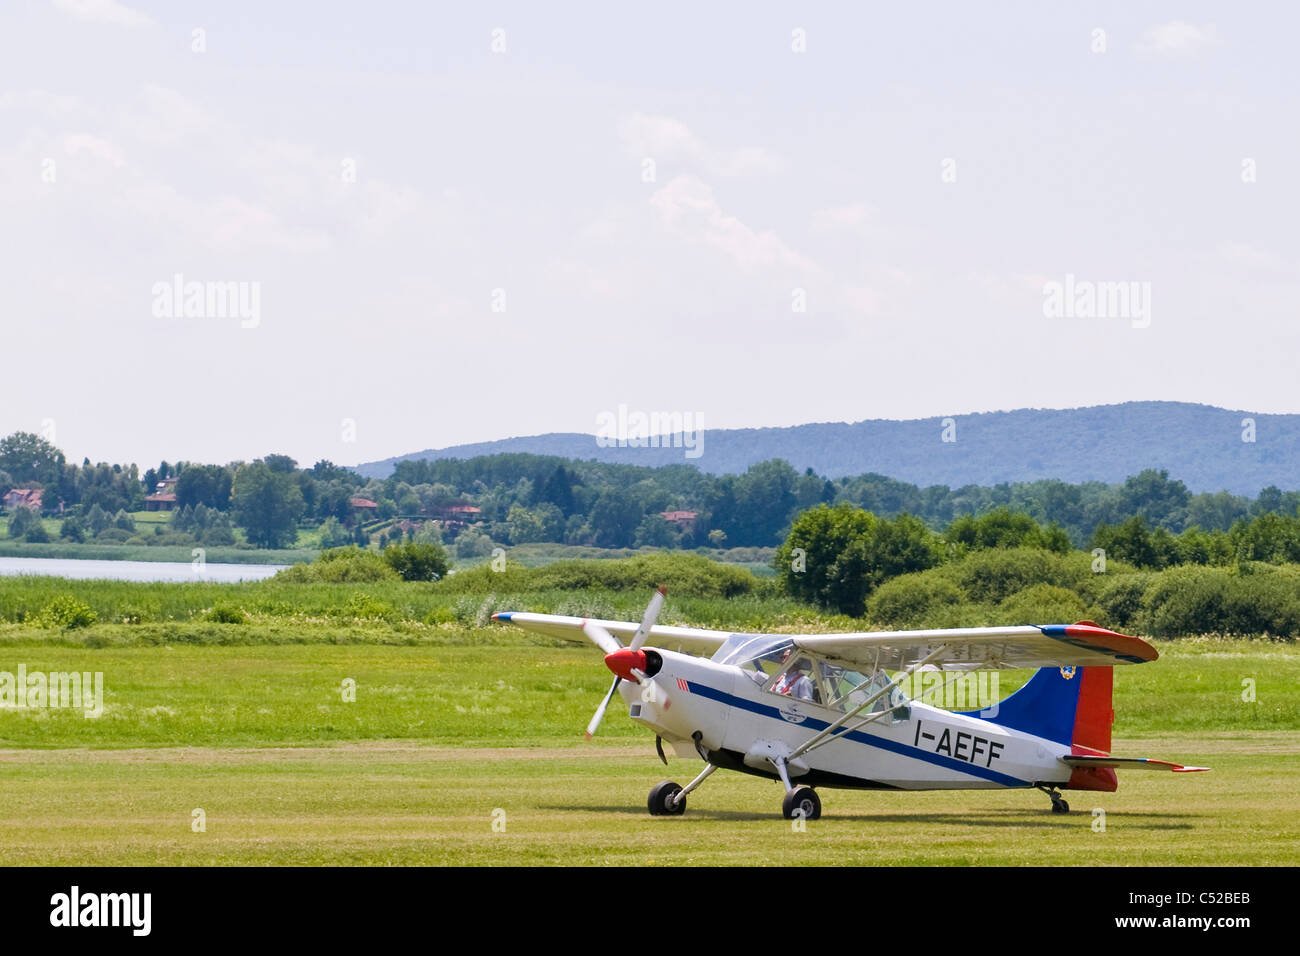 Airplane, Gliders airport Adele Orsi, varese, Lombardy, Italy Stock Photo